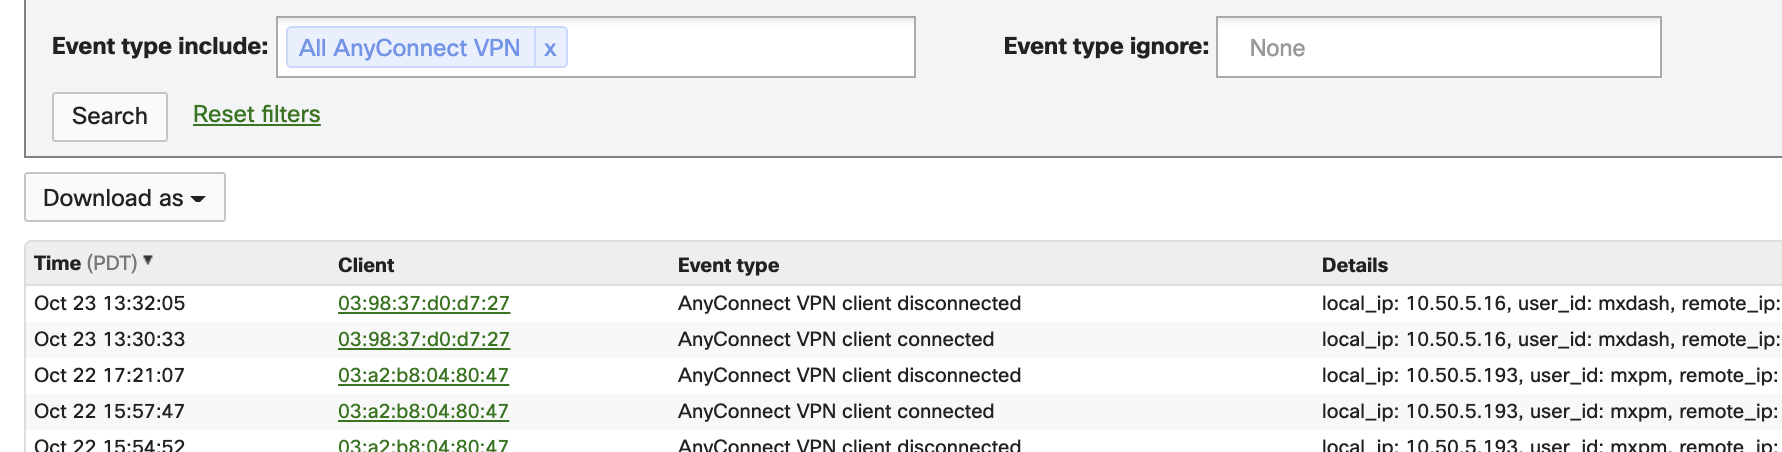 Event Log table displaying VPN client connected and VPN client disconnected events.